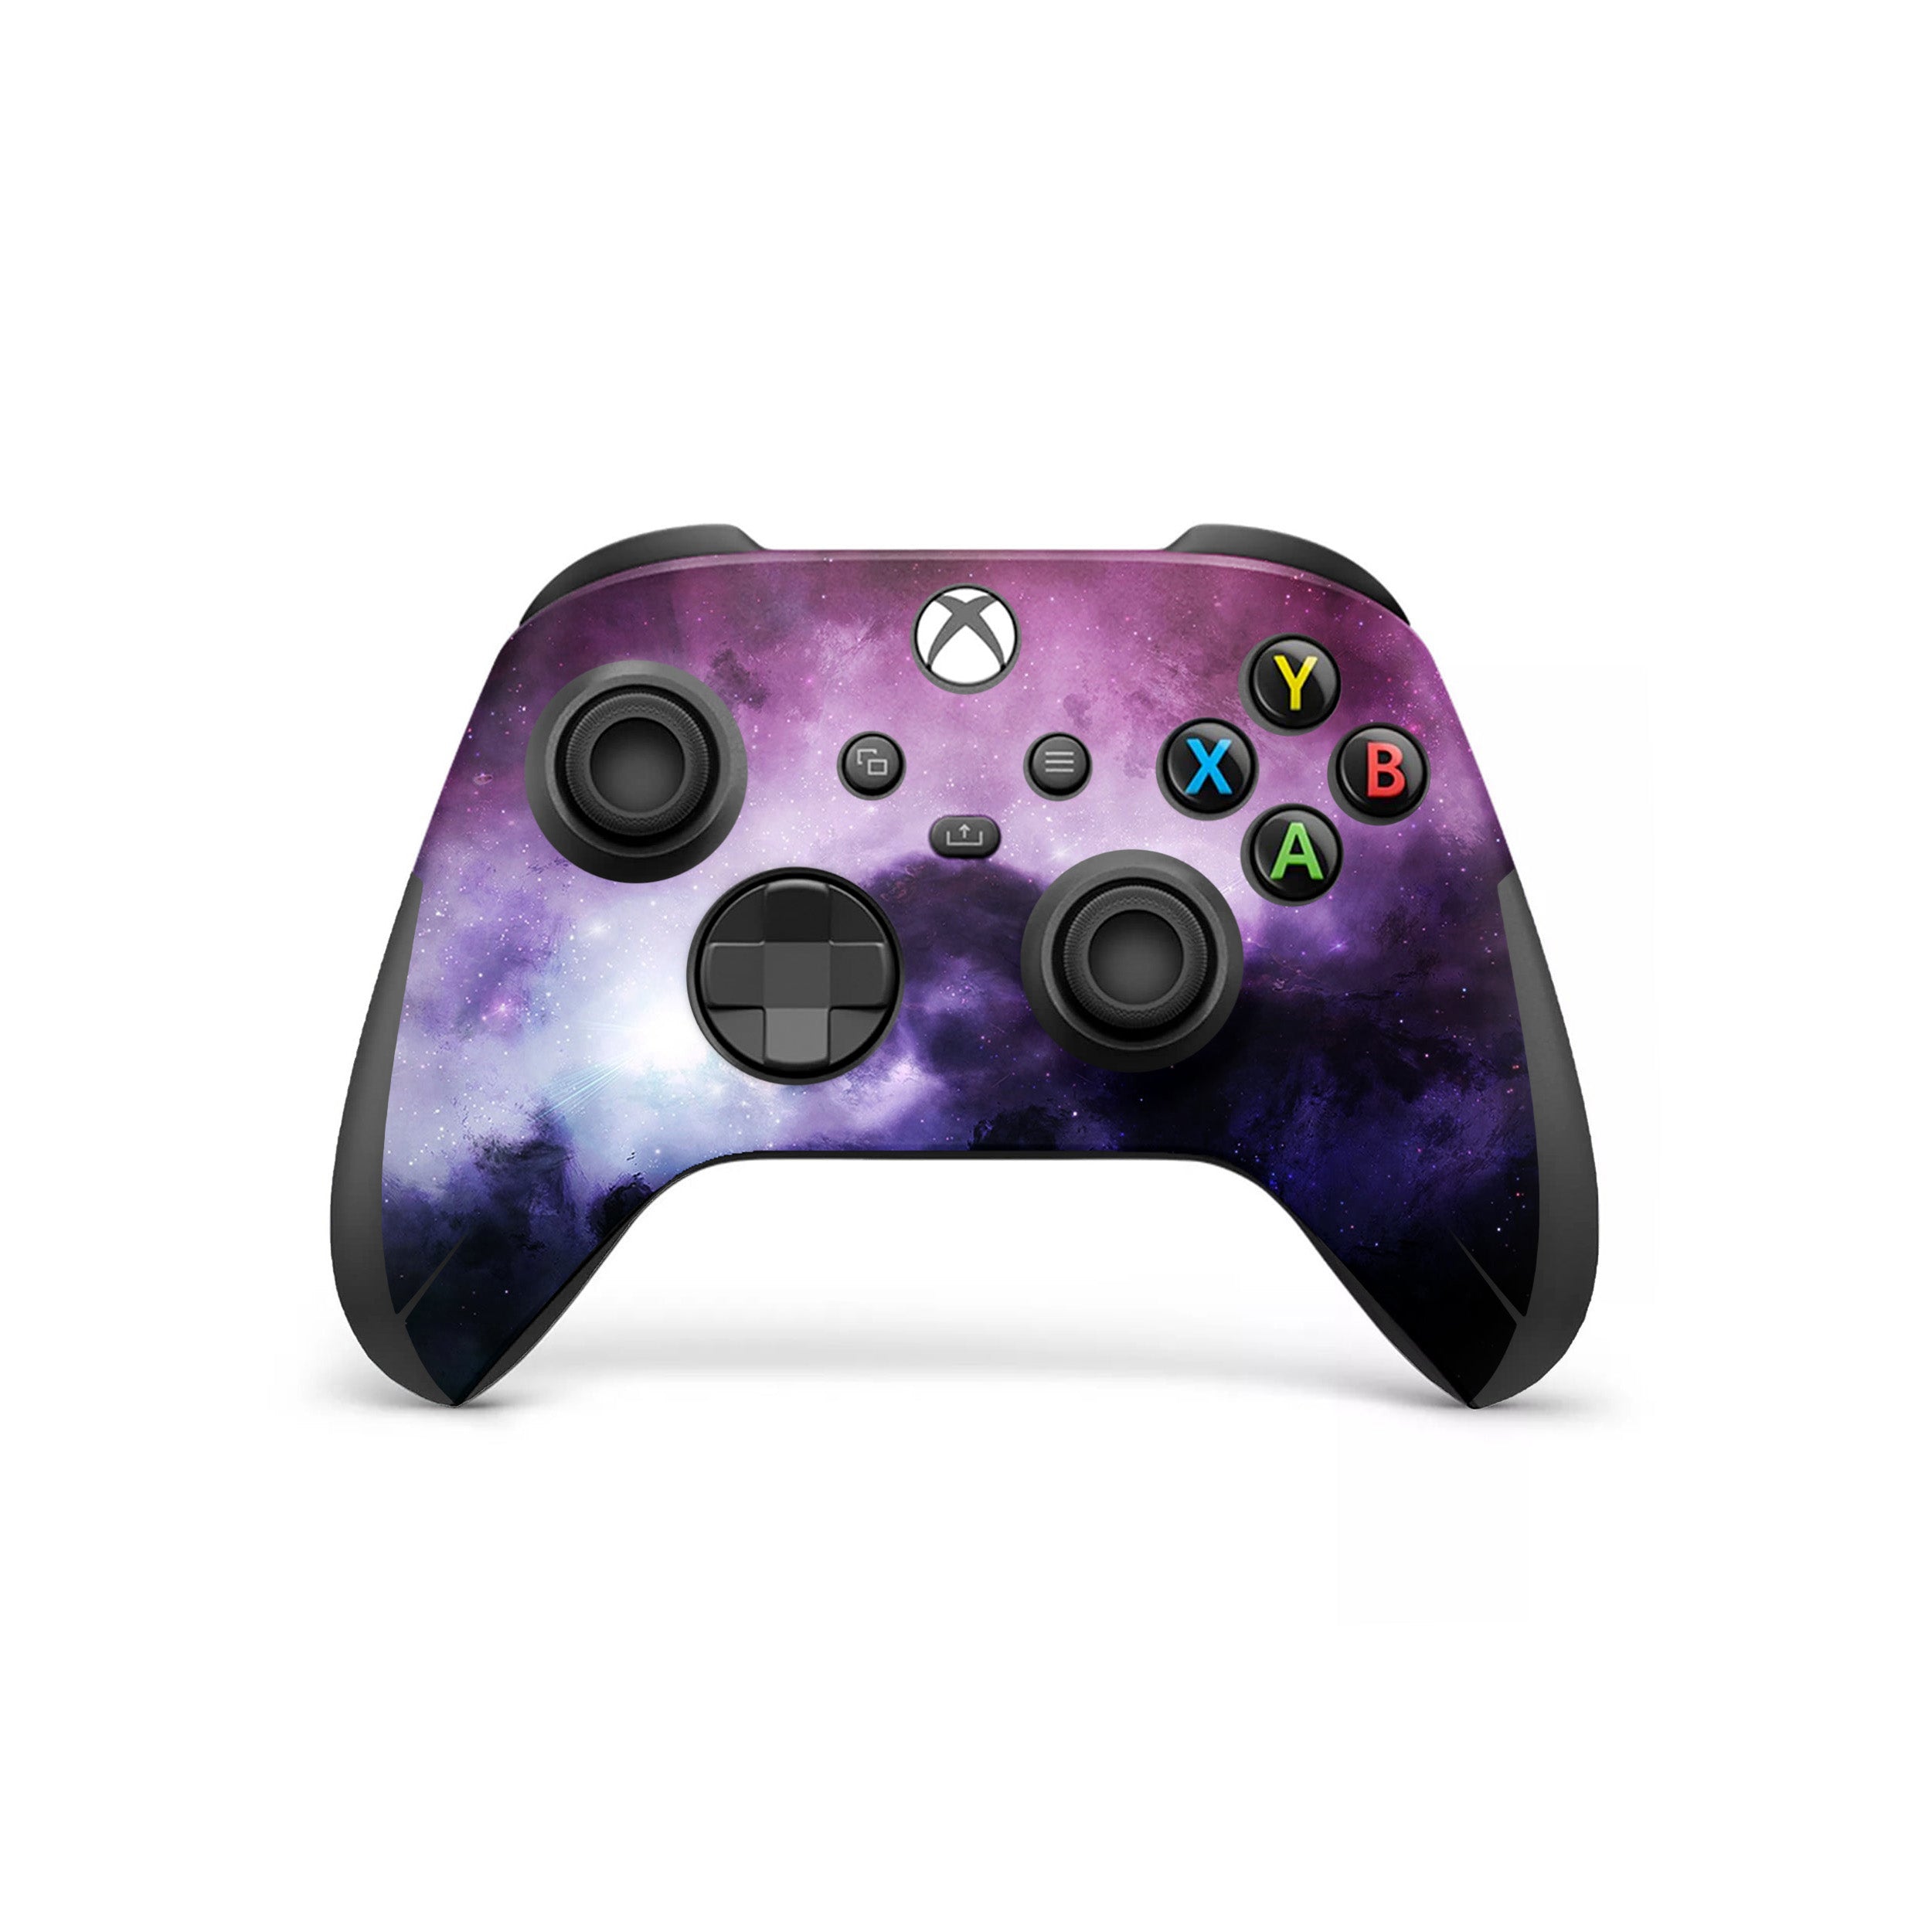 A video game skin featuring a Space design for the Xbox Wireless Controller.